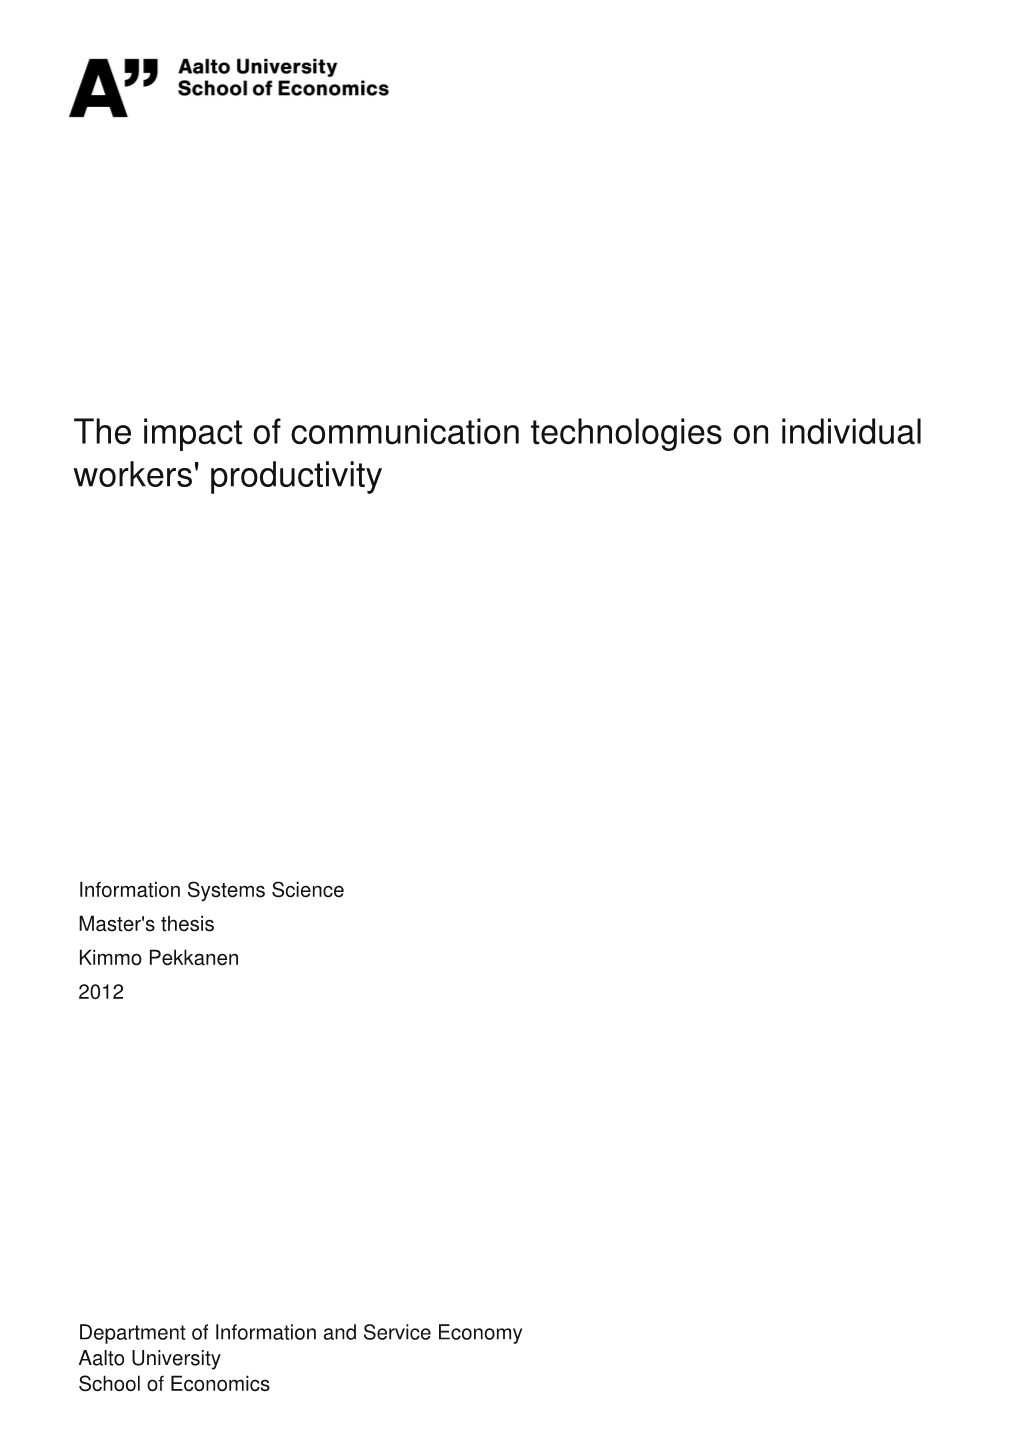 The Impact of Communication Technologies on Individual Workers' Productivity